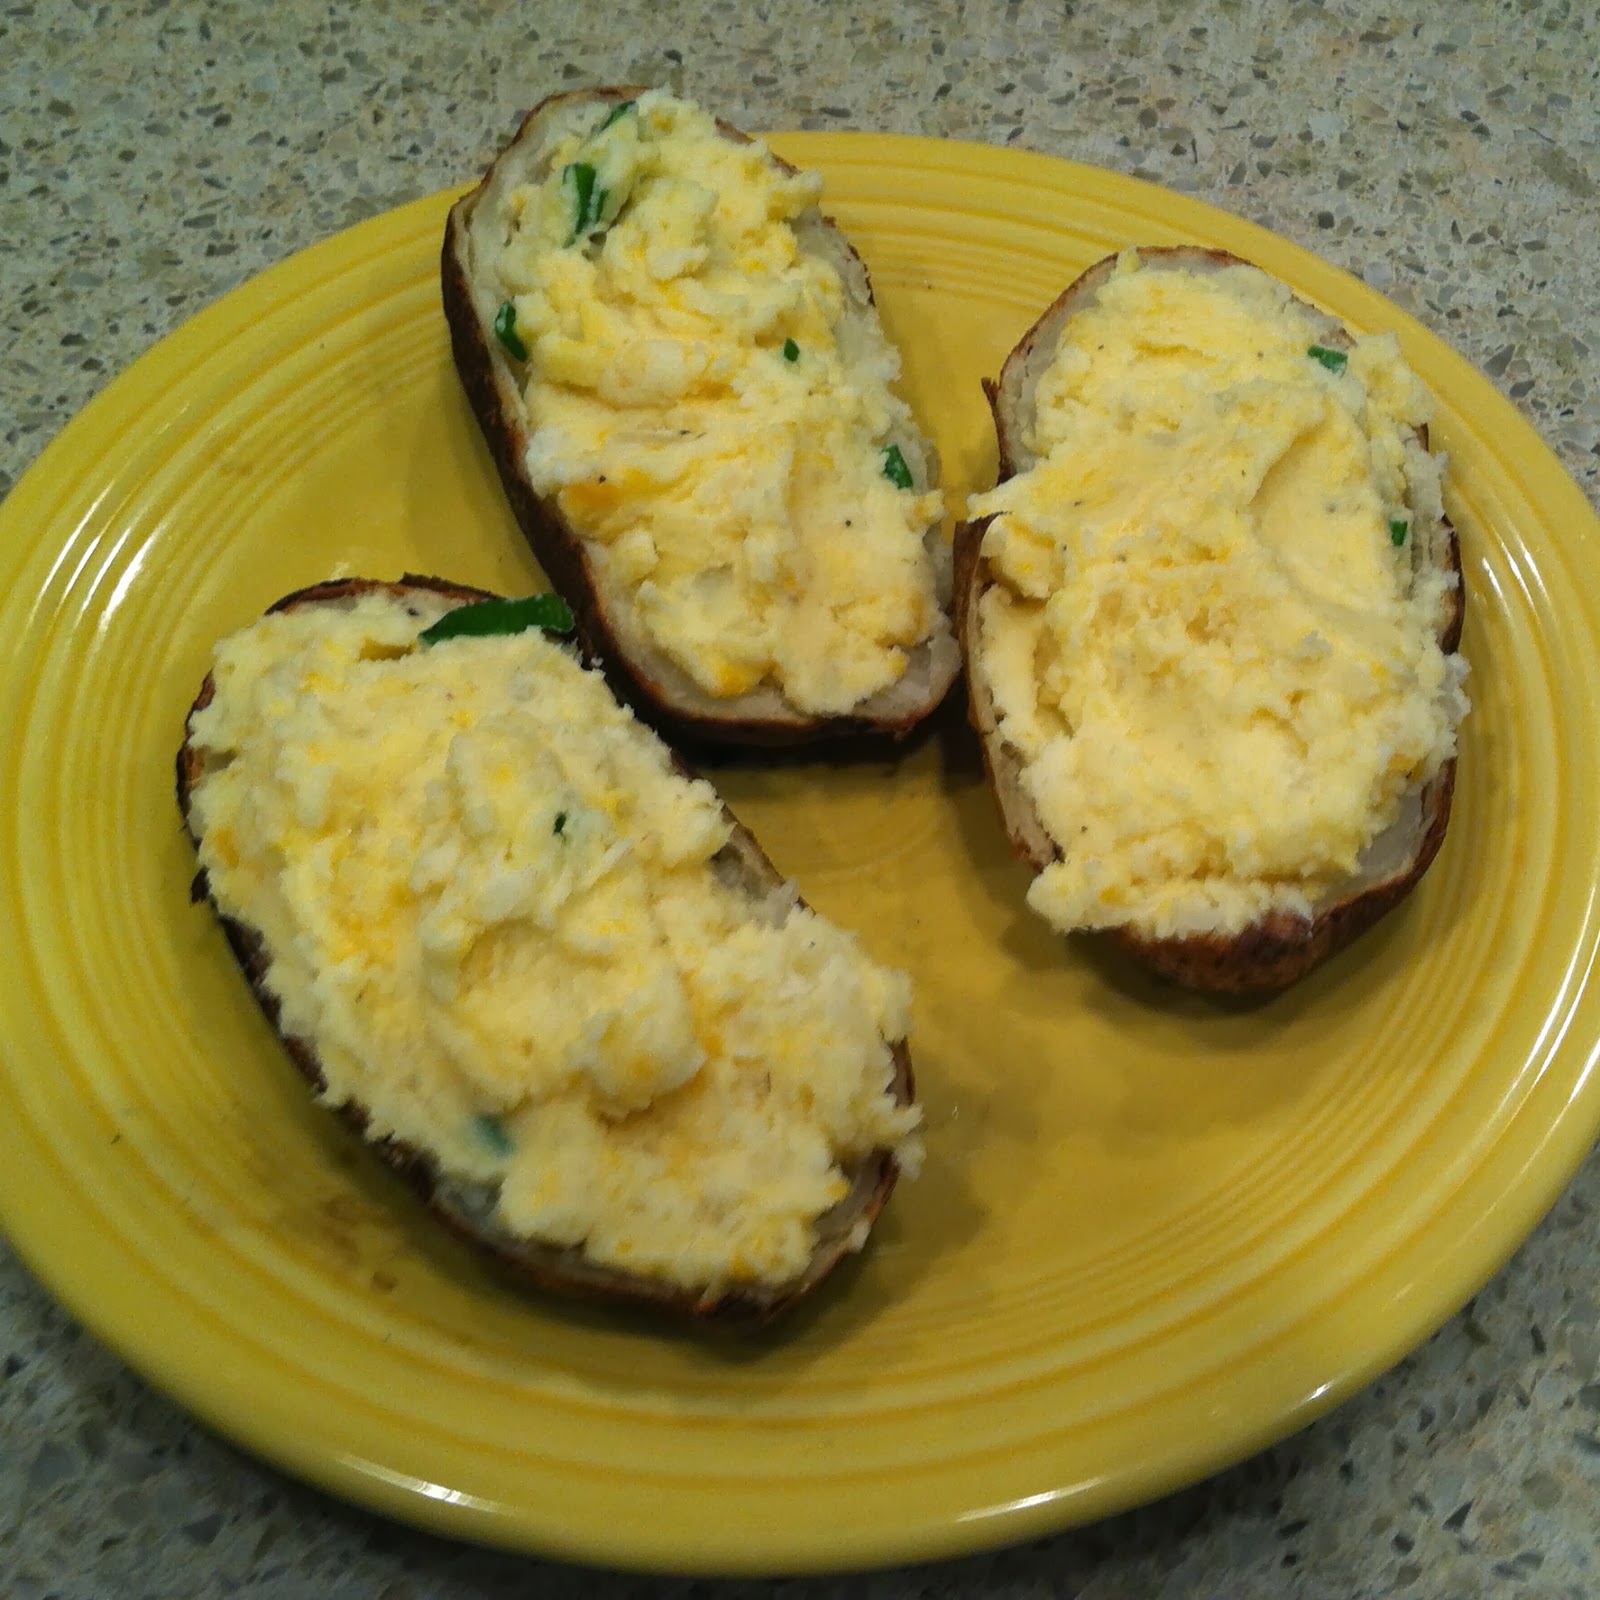 The Lowcountry Lady: Big Green Egg: Twice Baked Potatoes